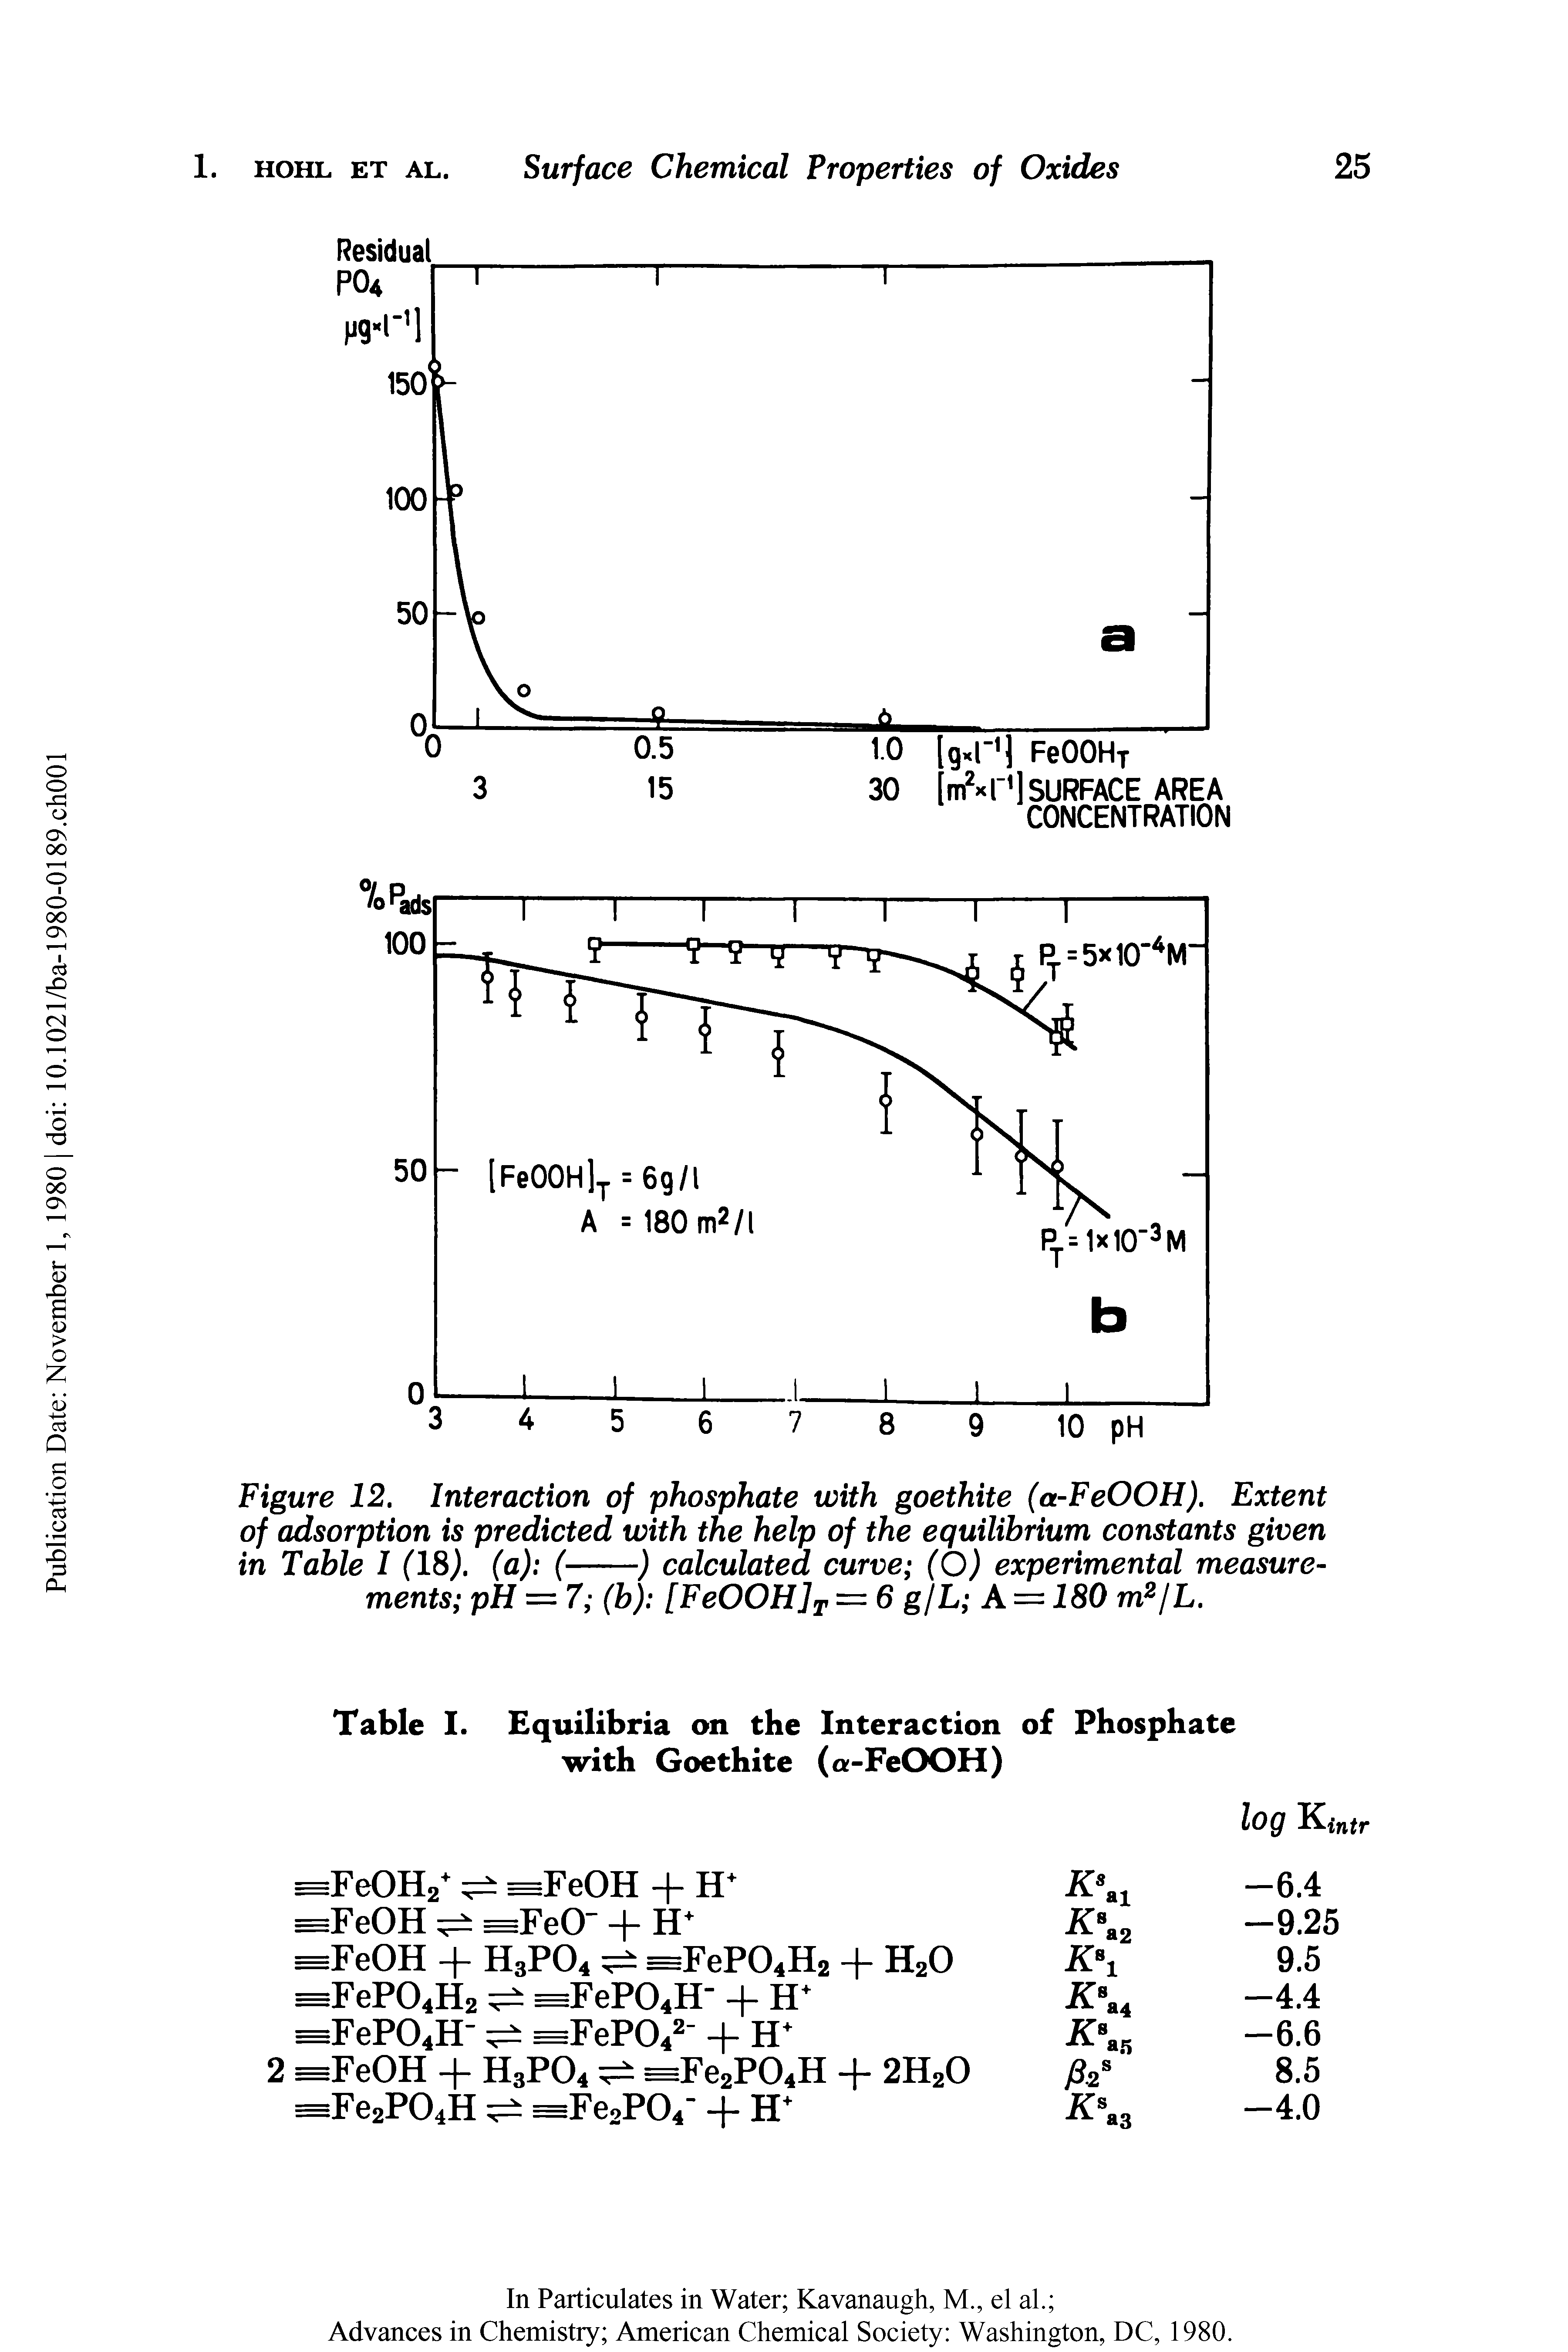 Figure 12. Interaction of phosphate with goethite (a-FeOOH). Extent of adsorption is predicted with the help of the equilibrium constants given in Table I (IS), (a) (-) calculated curve (O) experimental measure-...